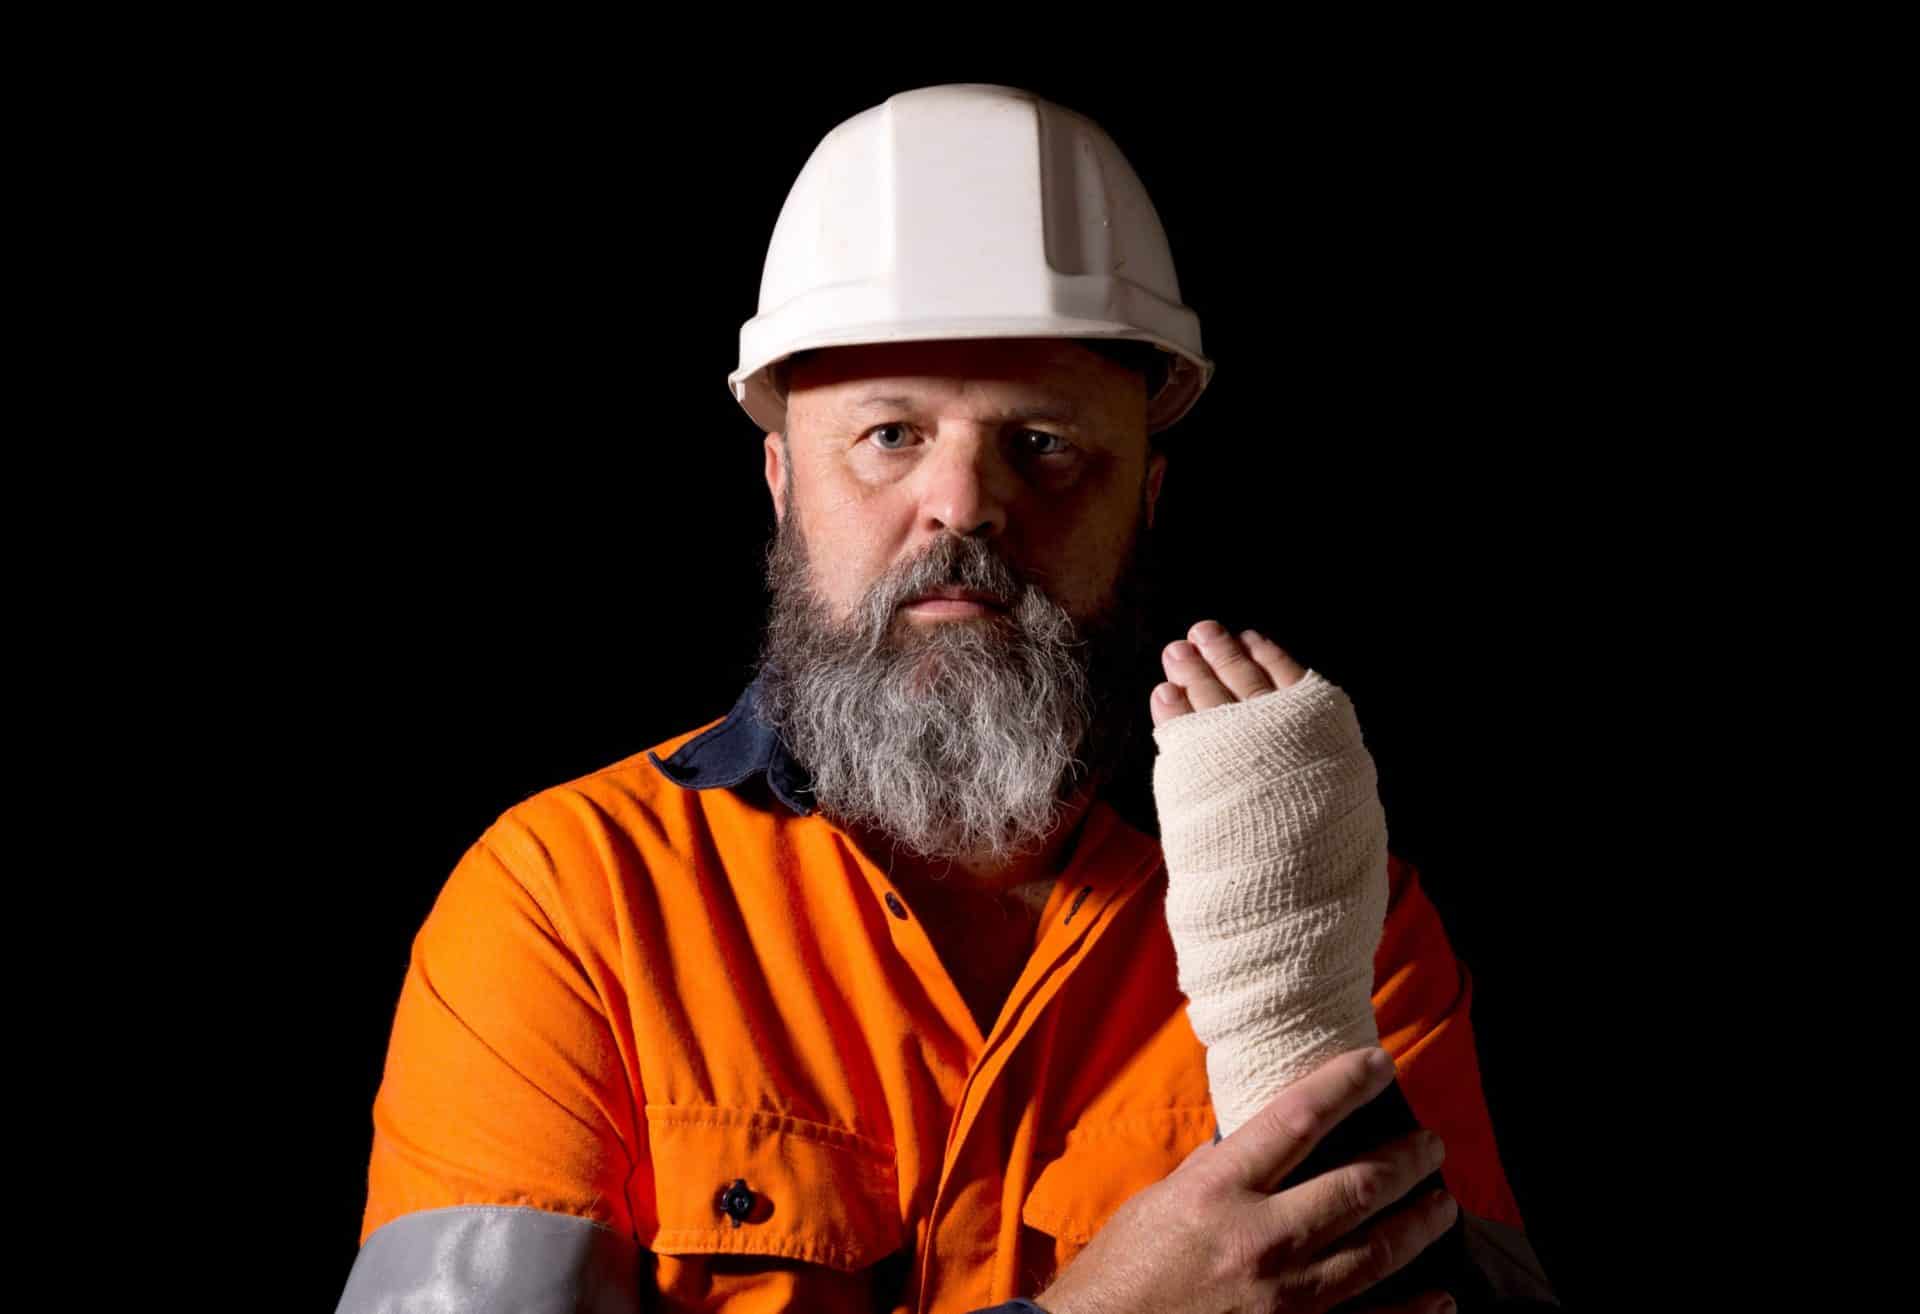 New York Construction Worker Injuries: What About Your Employer?